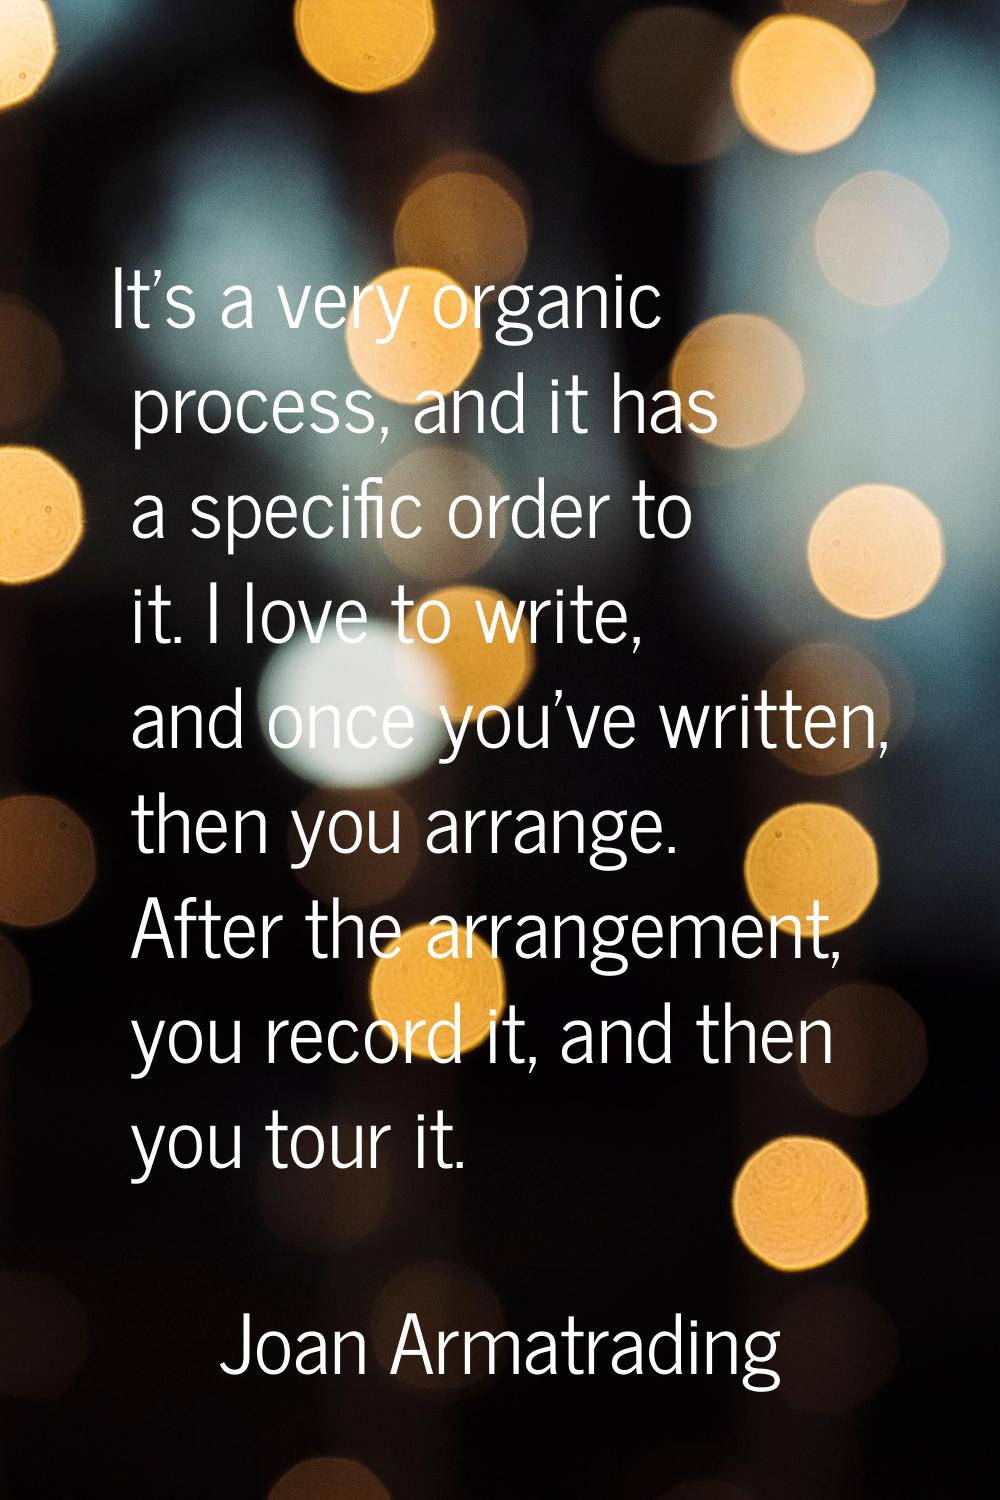 It's a very organic process, and it has a specific order to it. I love to write, and once you've wr